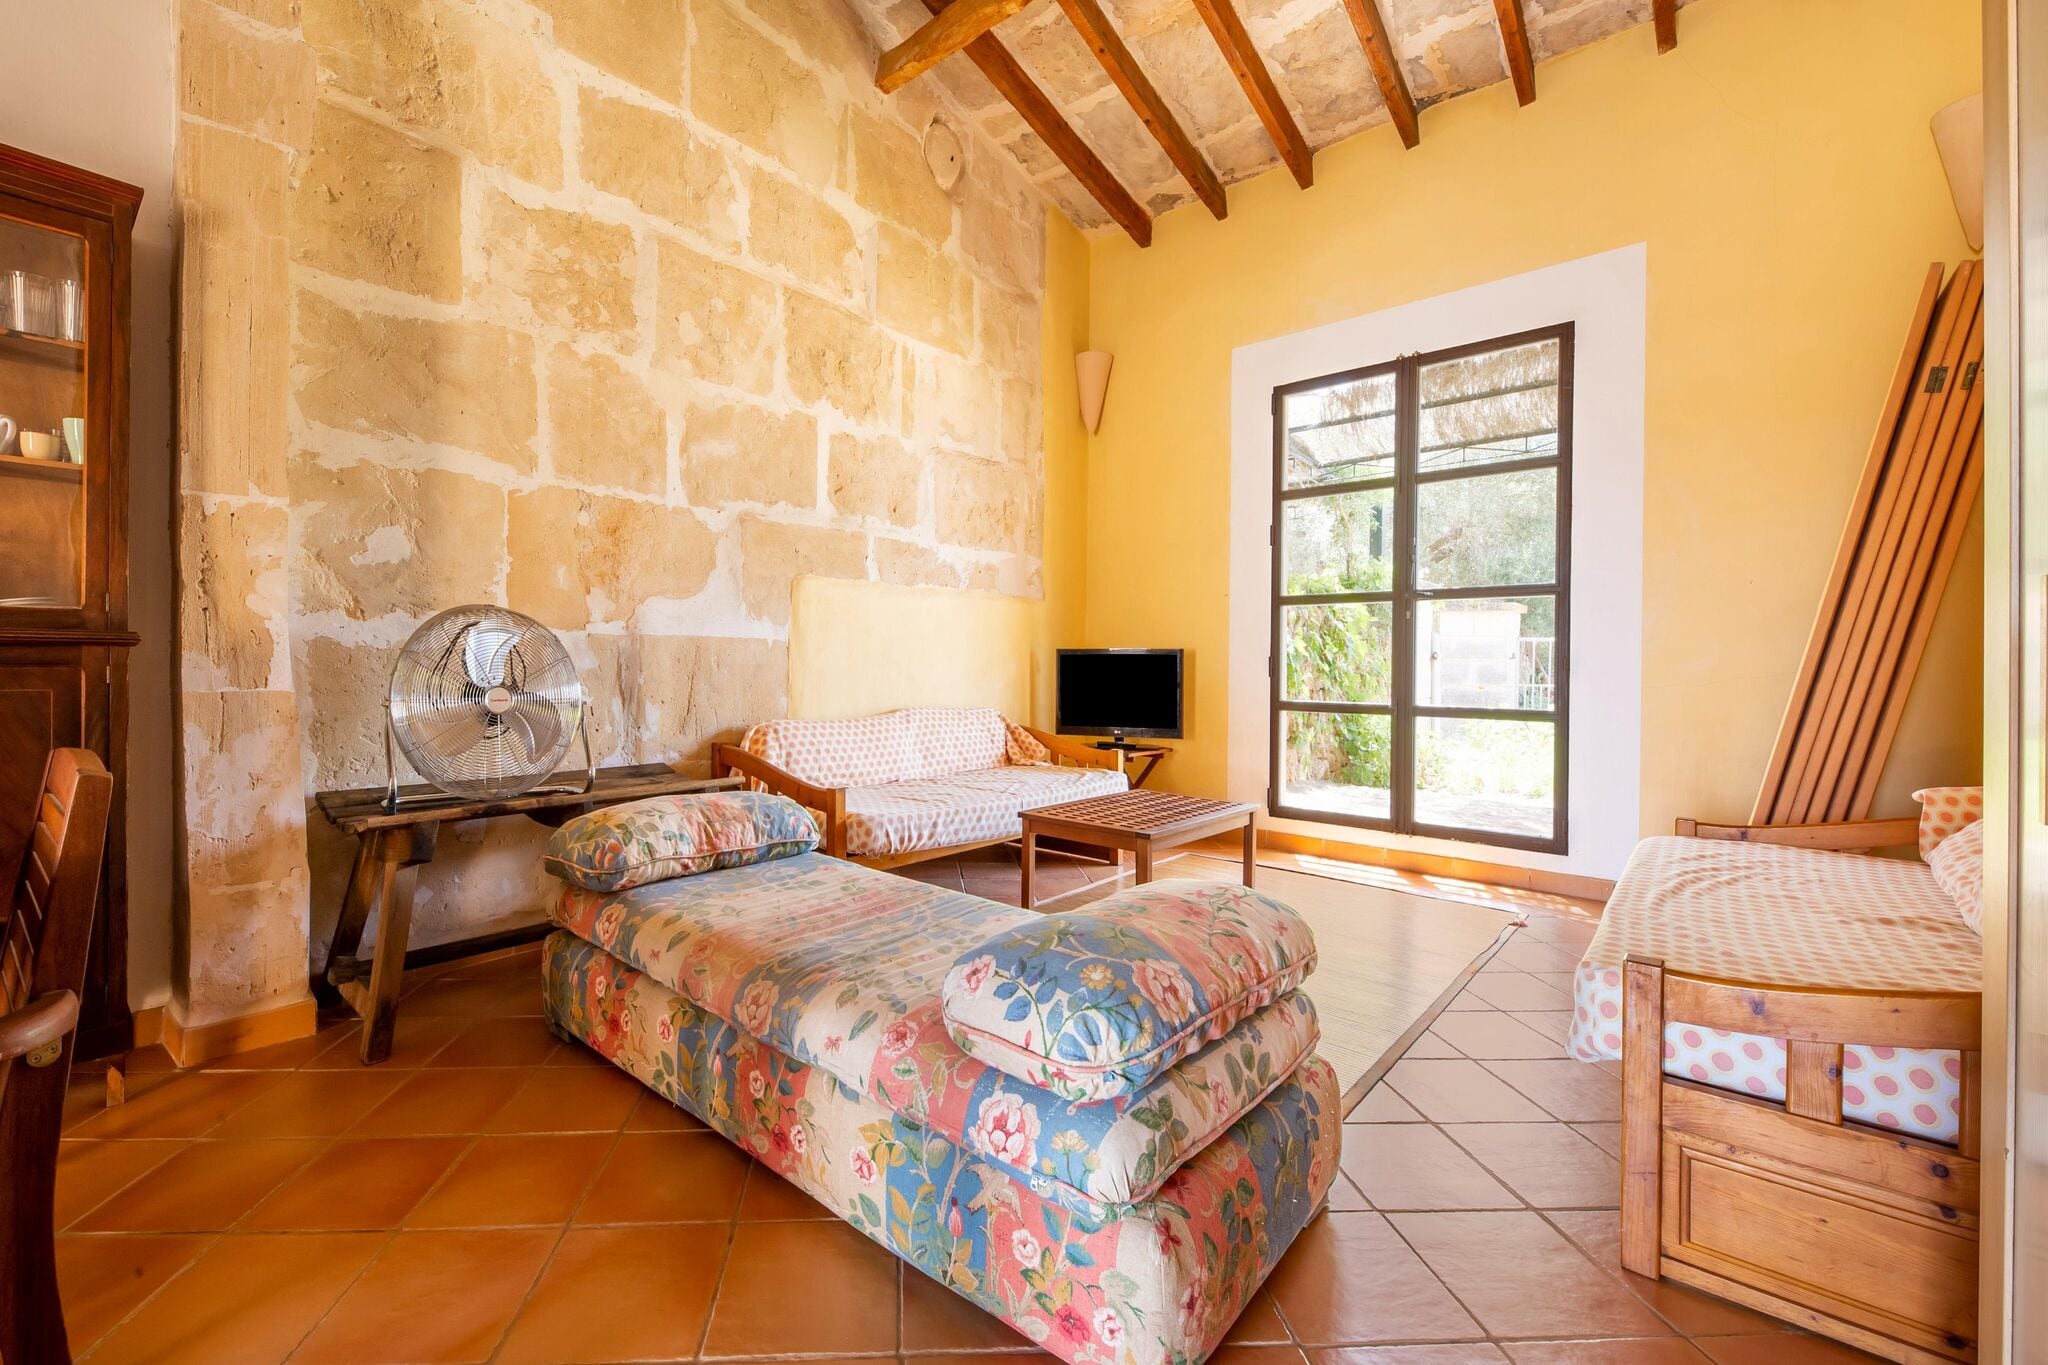 This finca has its own private access to the beautiful sandy beach Es Trenc